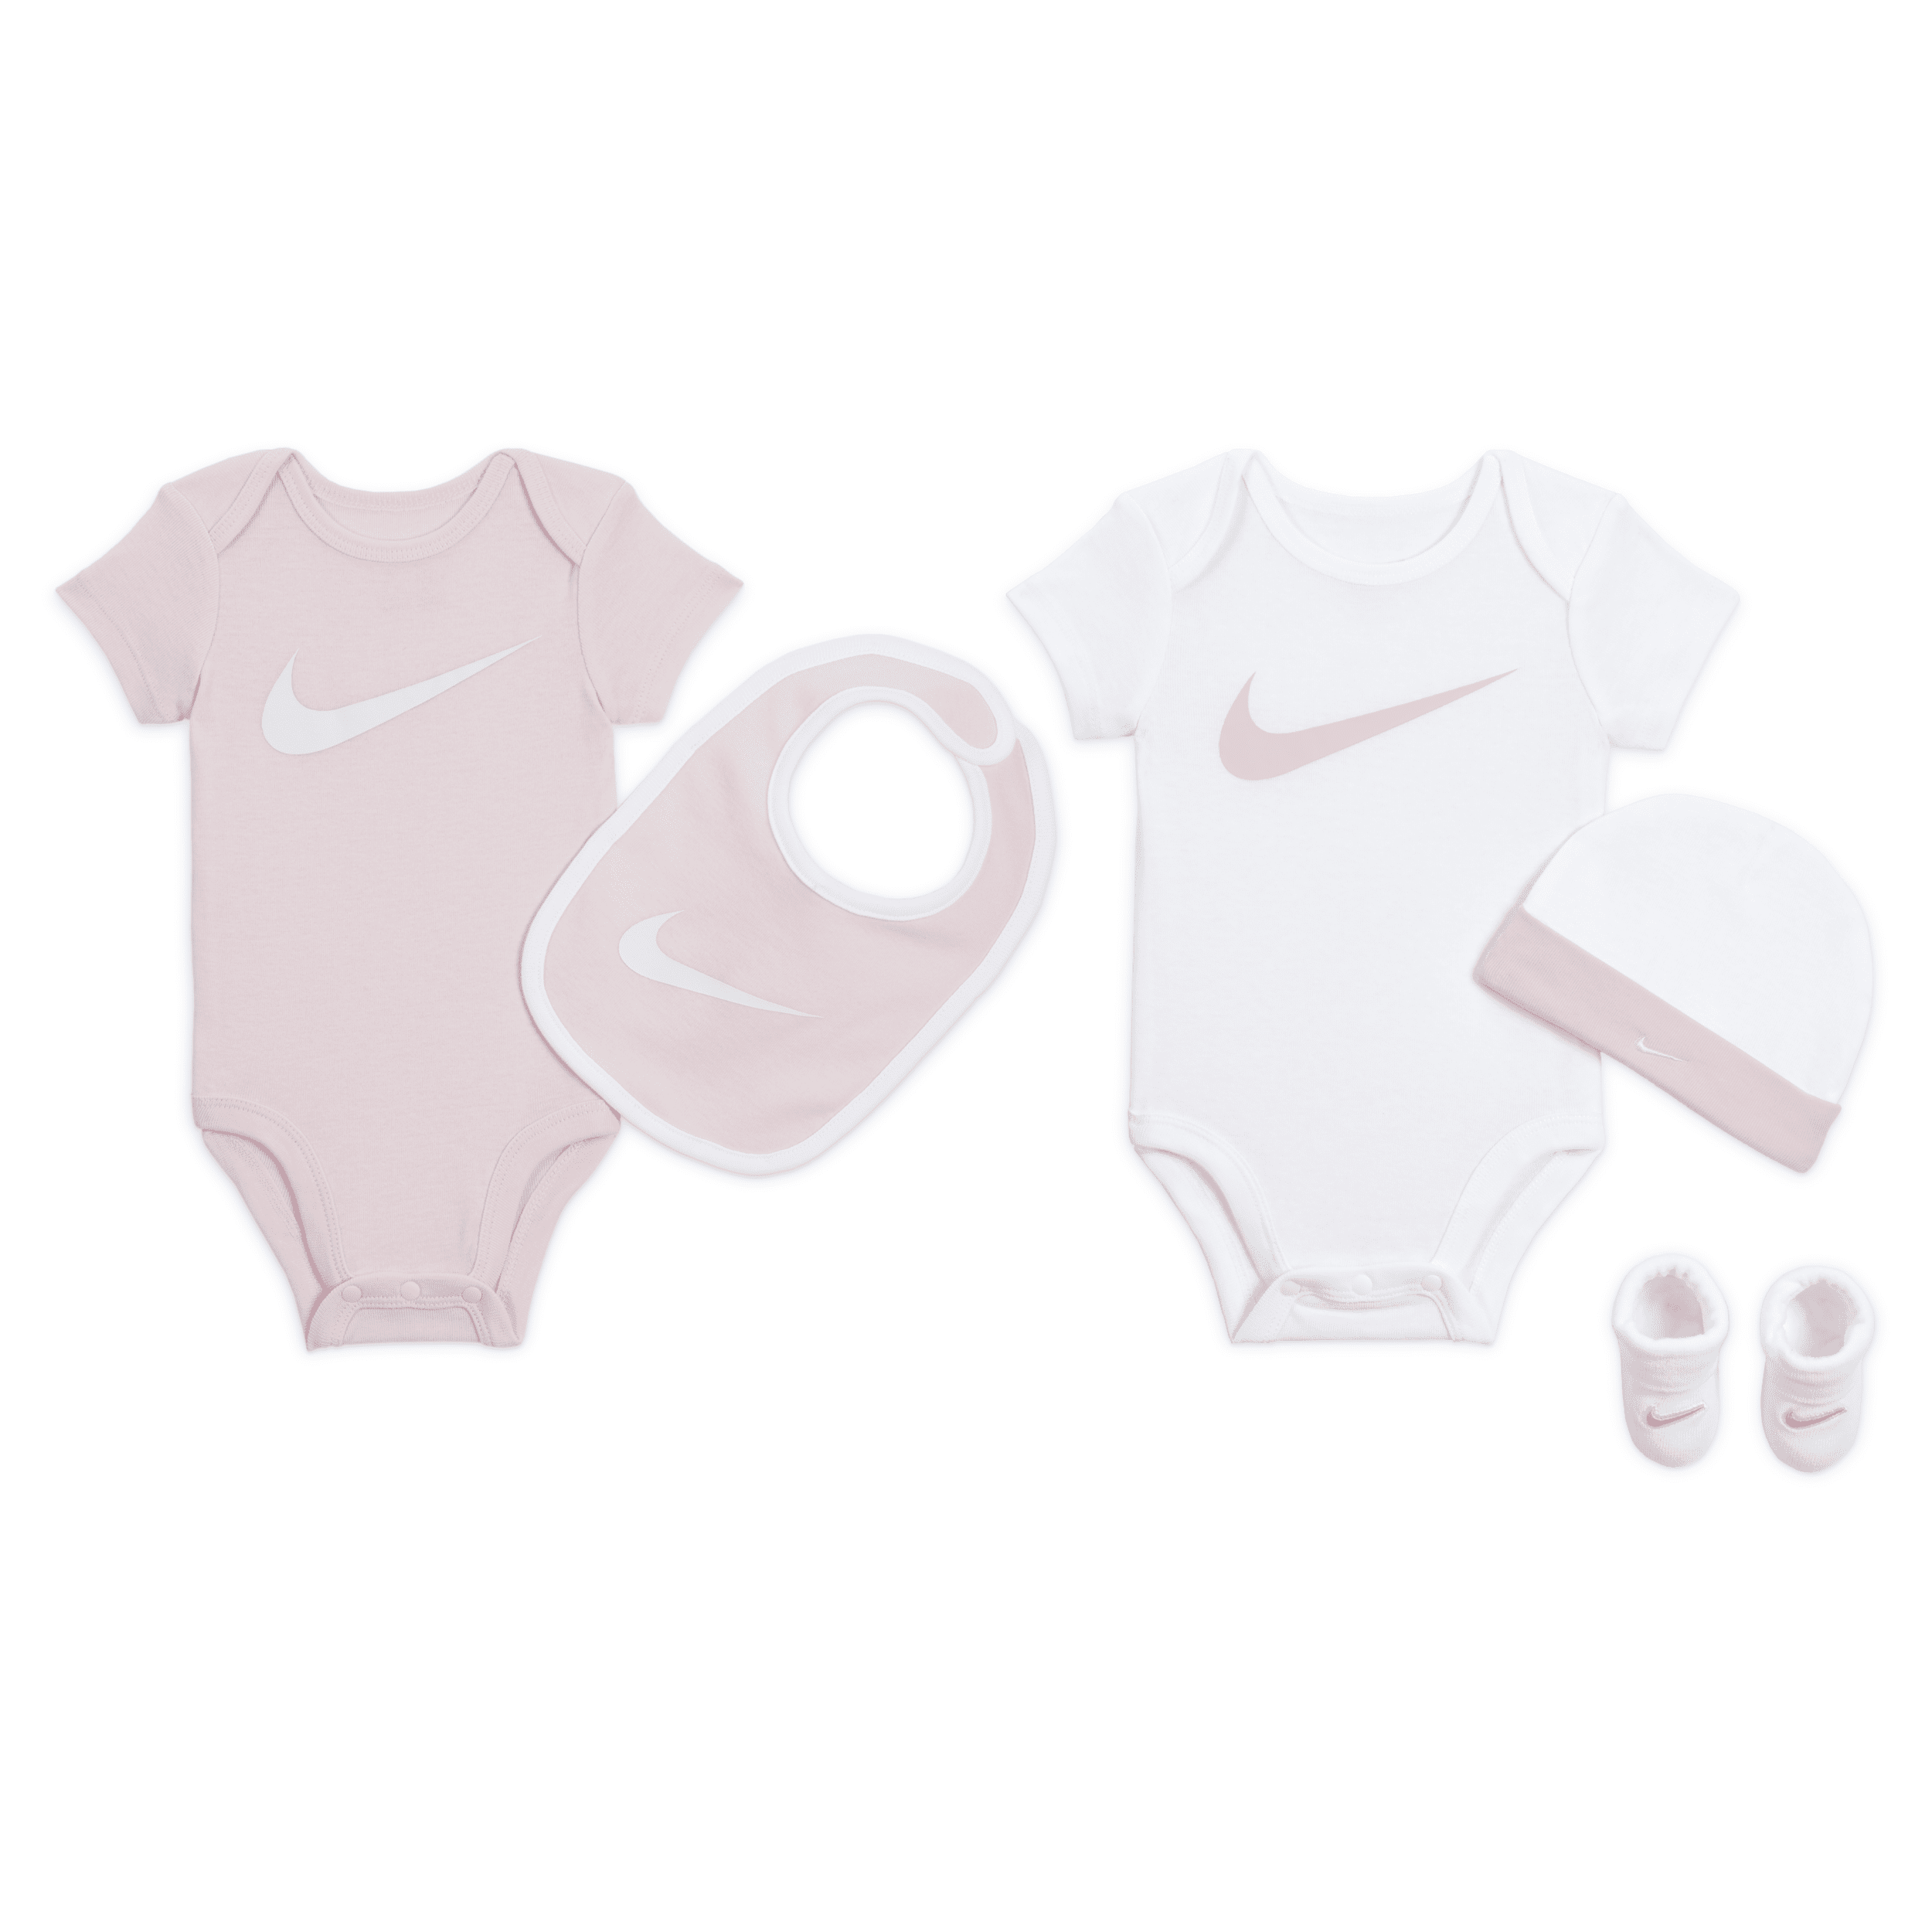 Nike 5-piece Gift Set Baby 5-piece Boxed Gift Set In Pink